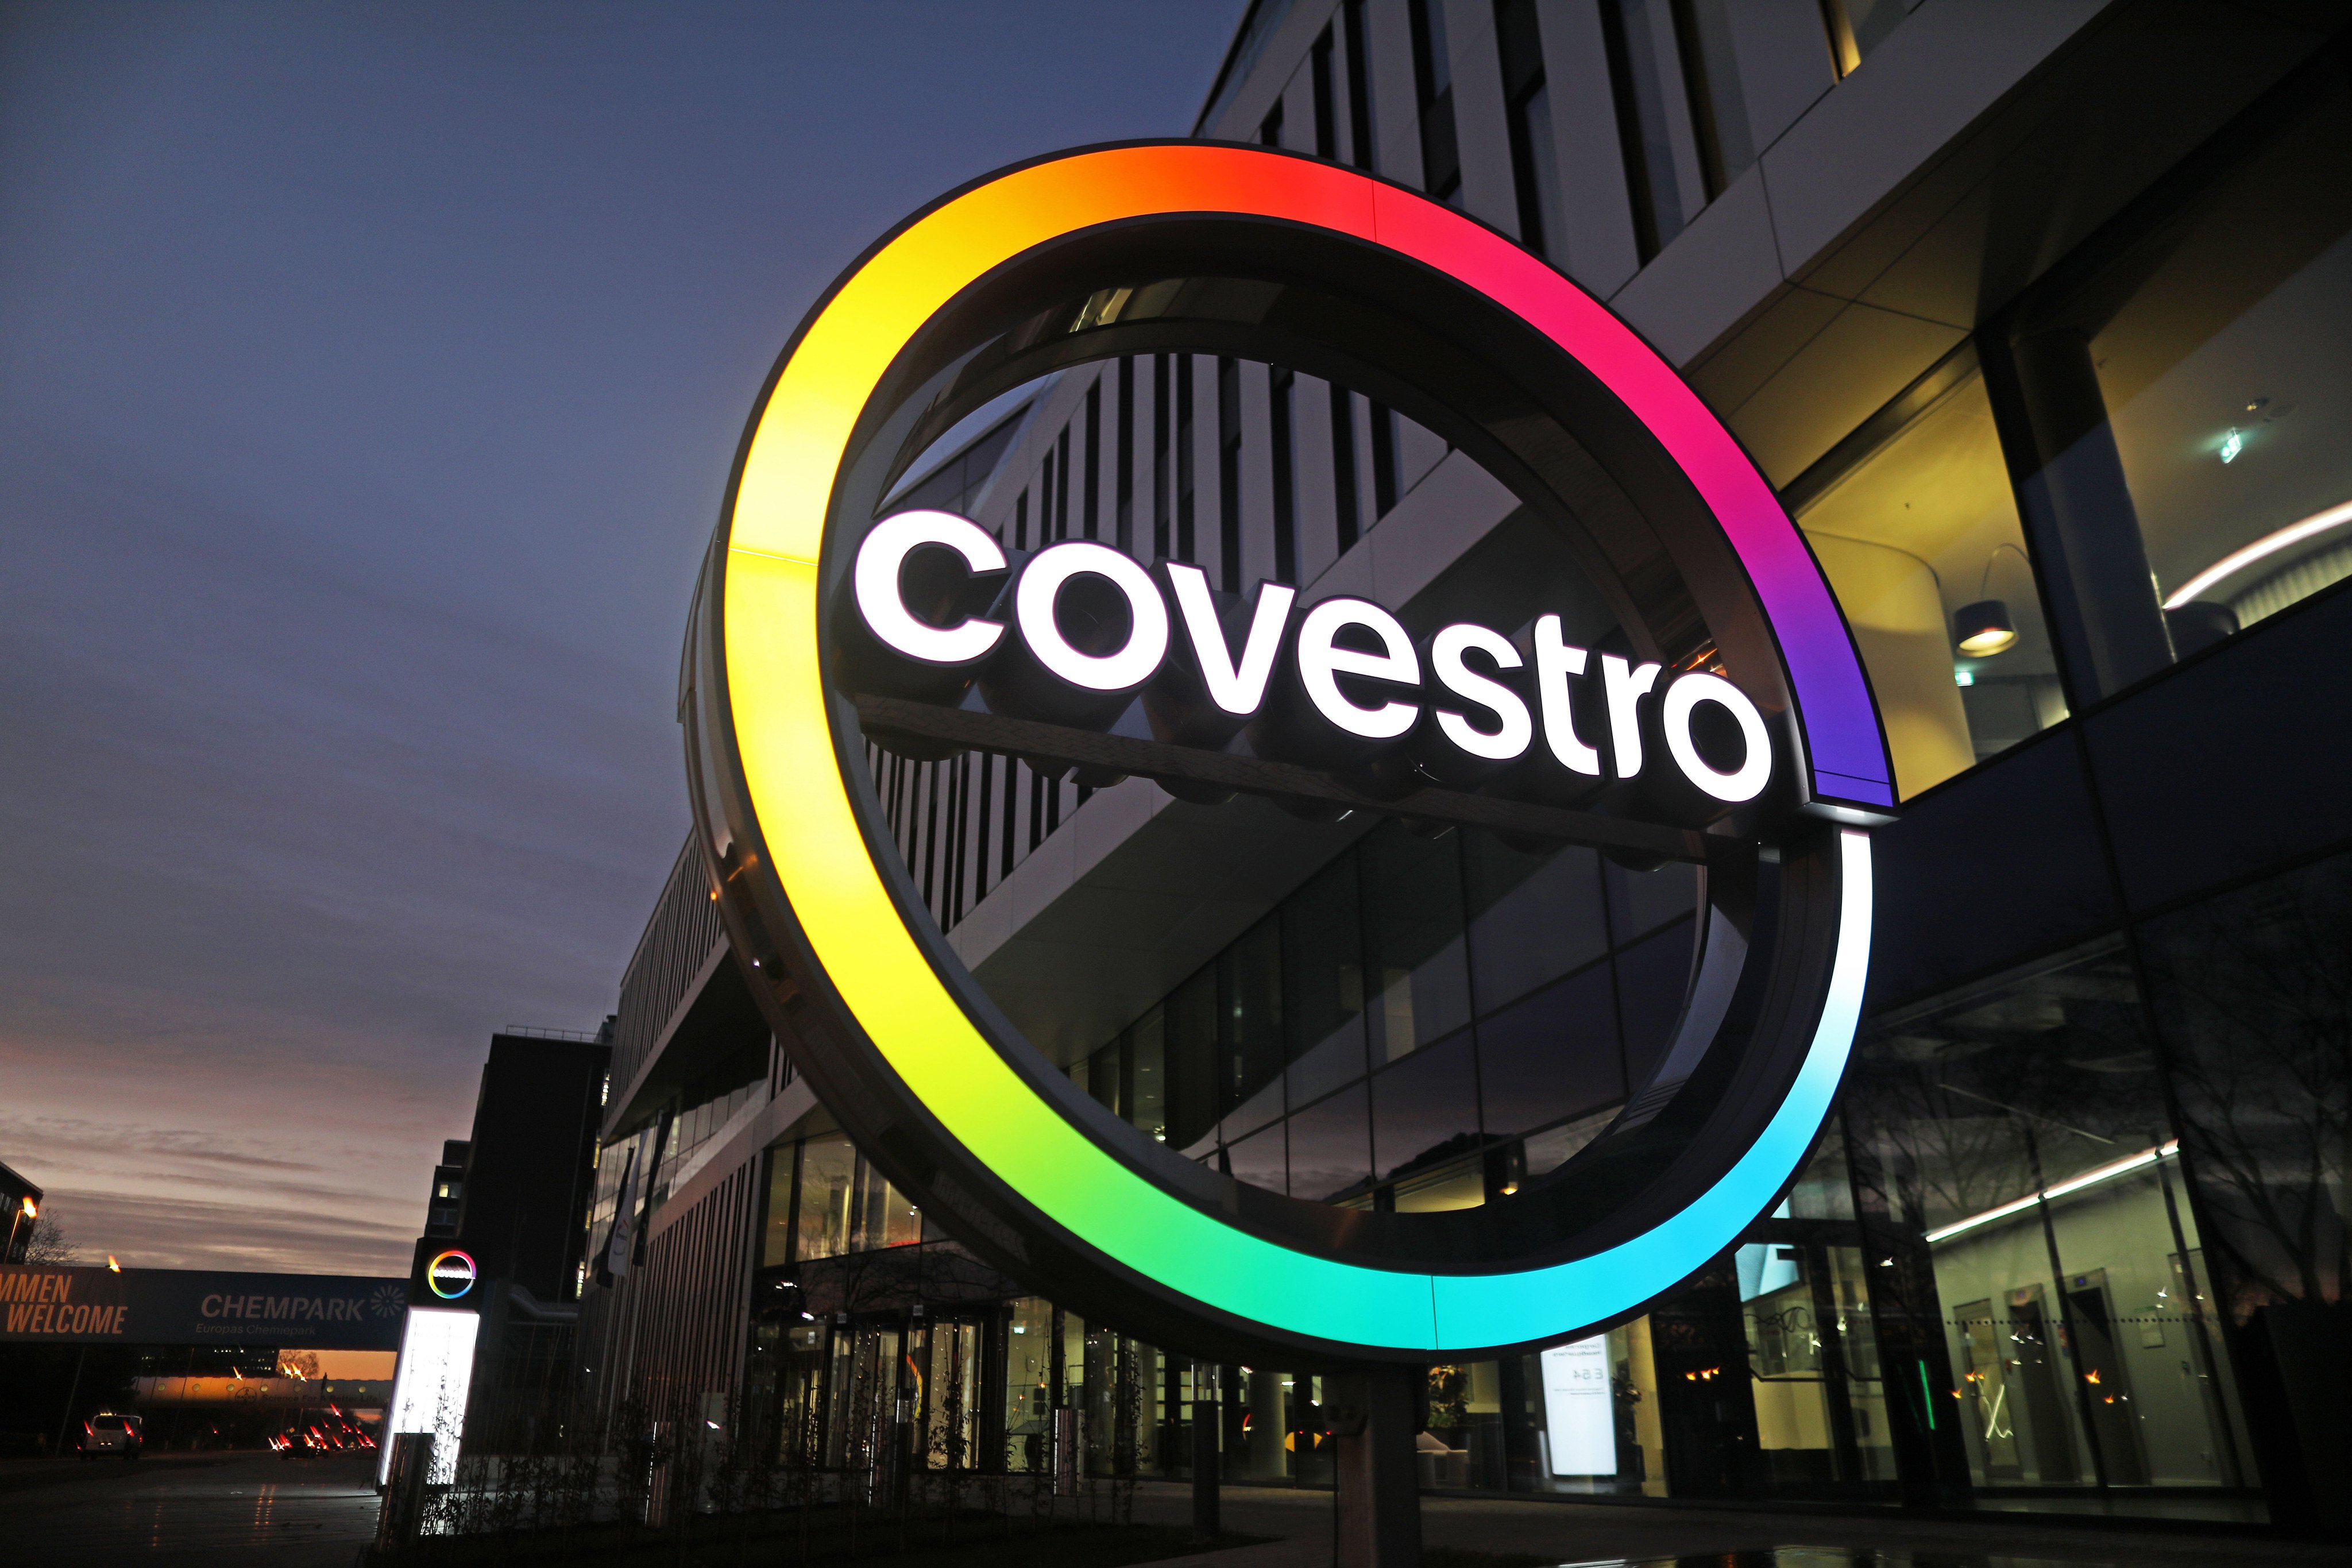 The logo of plastics company Covestro is illuminated in front of its corporate headquarters in Leverkusen, Germany.  Photo: DPA